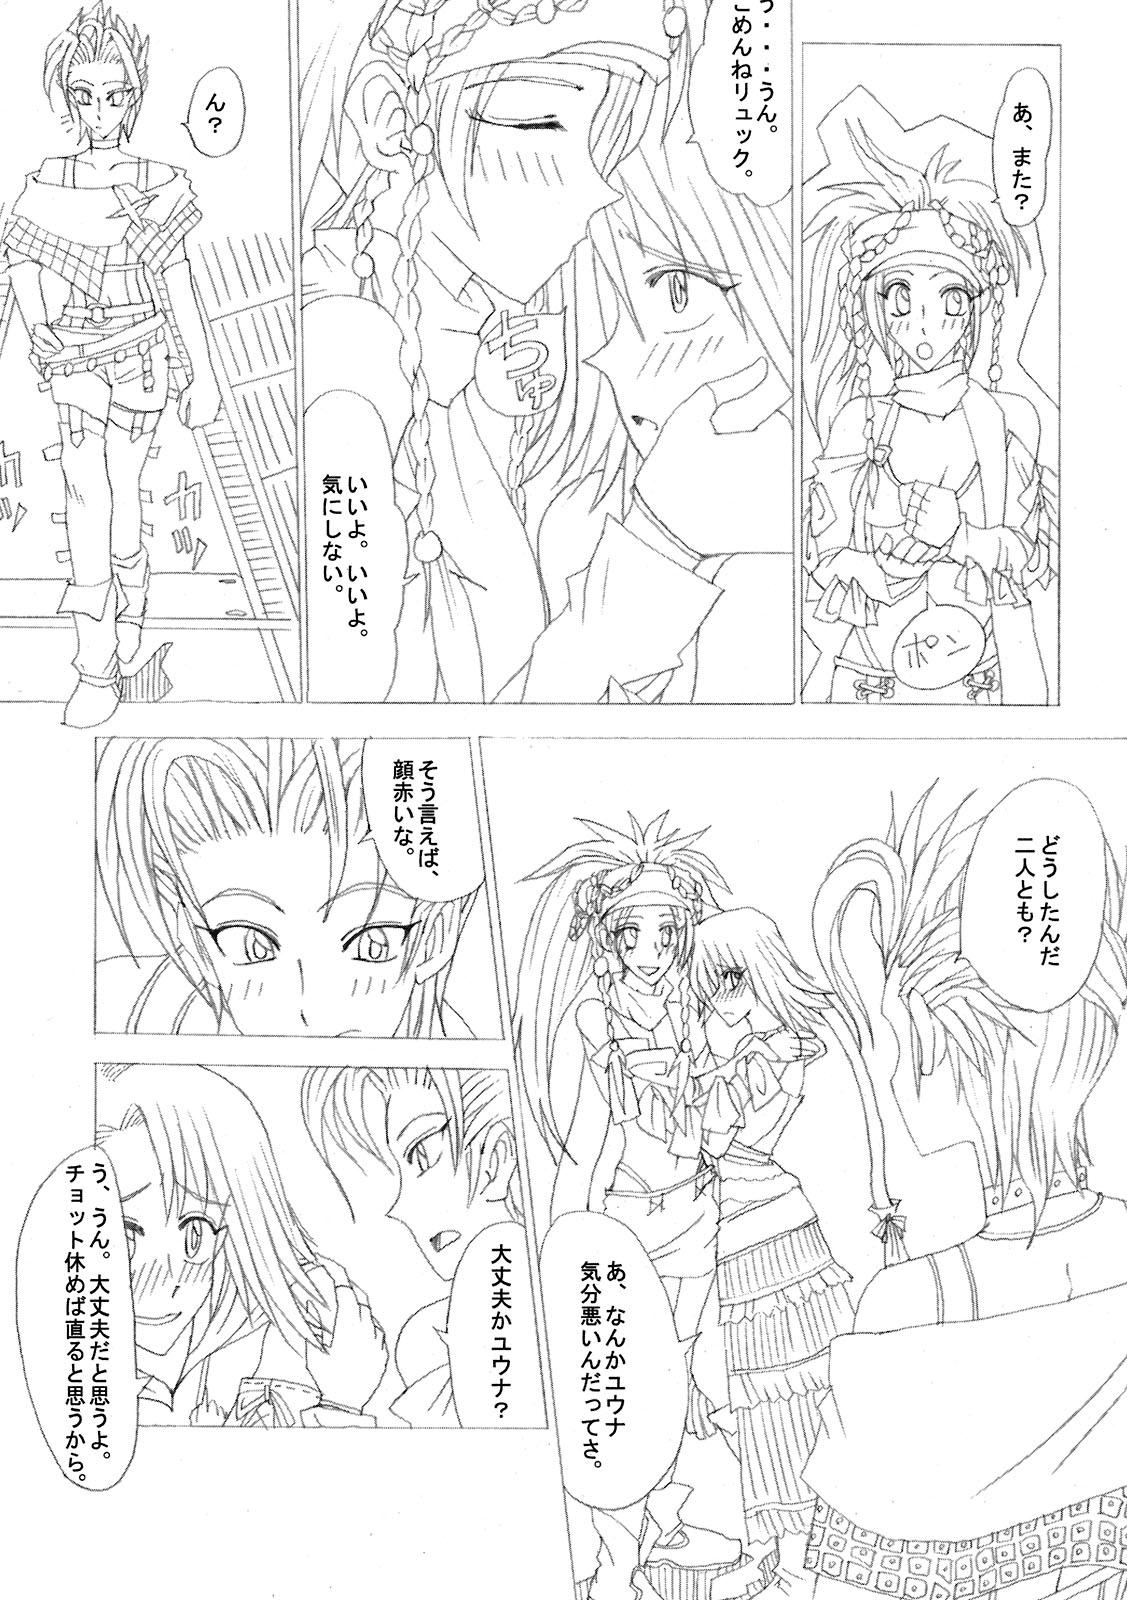 Gagging Shateru 2 - Final fantasy x 2 Transsexual - Page 7